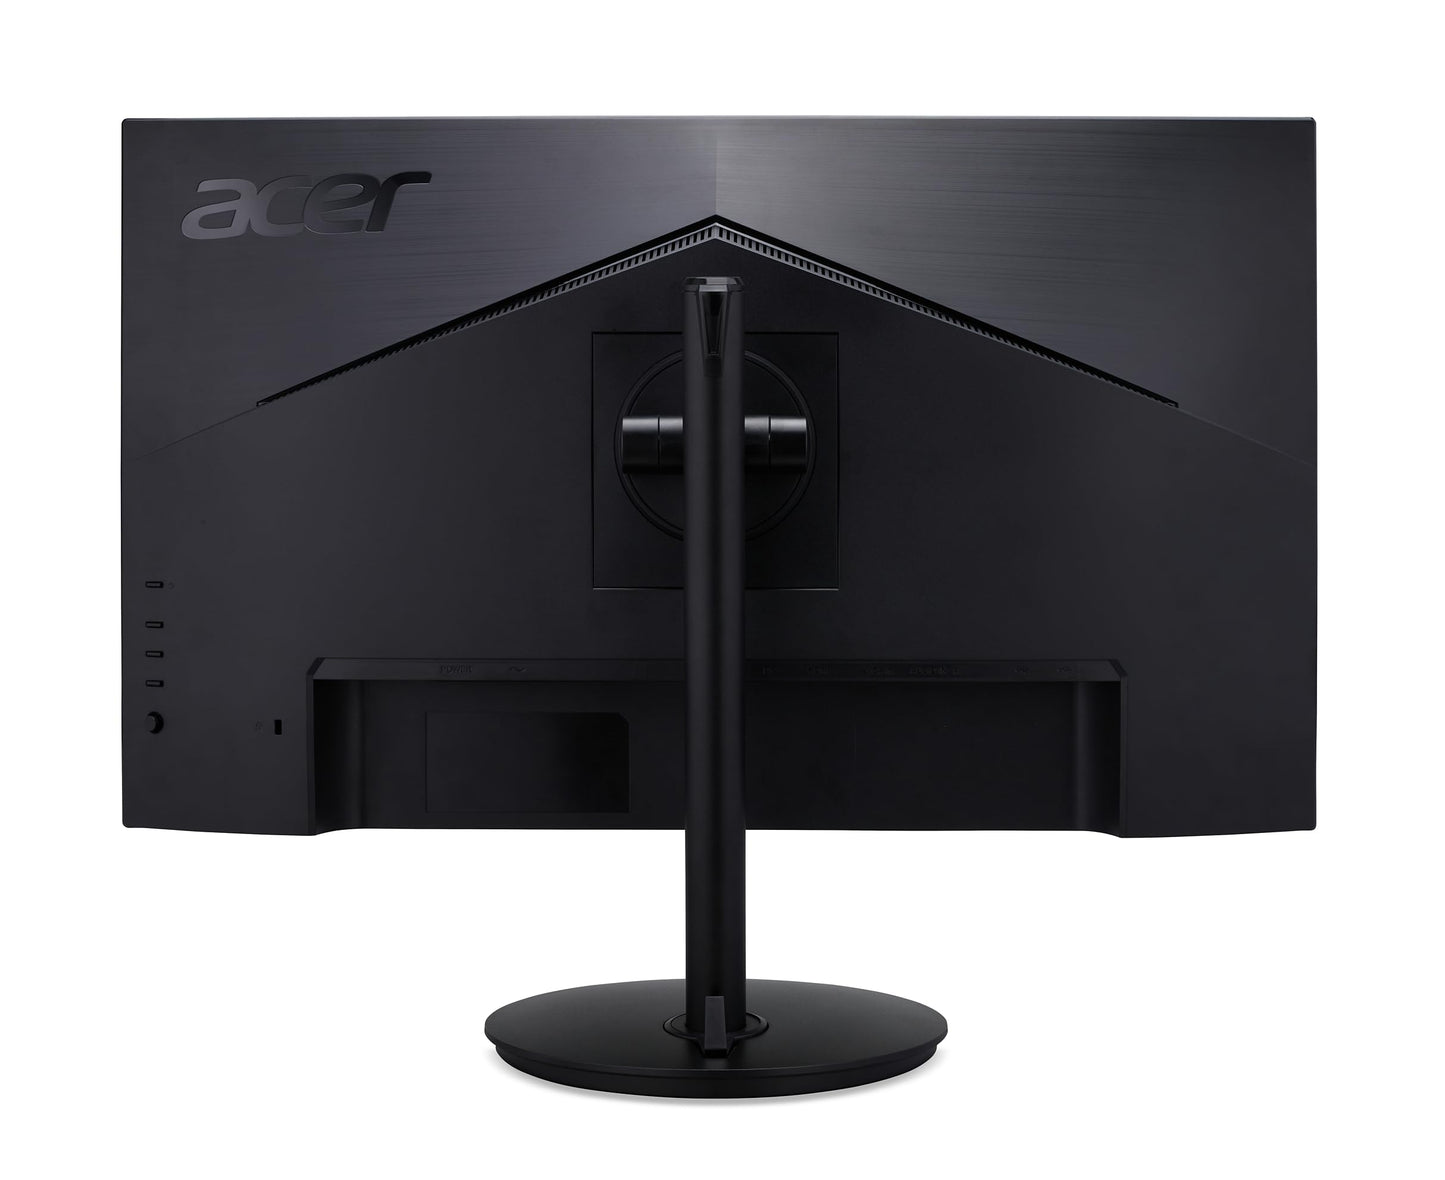 Acer CB272 Ebmiprx 27" FHD 1920 x 1080 Zero Frame Home Office Monitor | AMD FreeSync | 1ms VRB | 100Hz | 99% sRGB | Height Adjustable Stand with Swivel, Tilt & Pivot (Display Port, HDMI & VGA Ports)